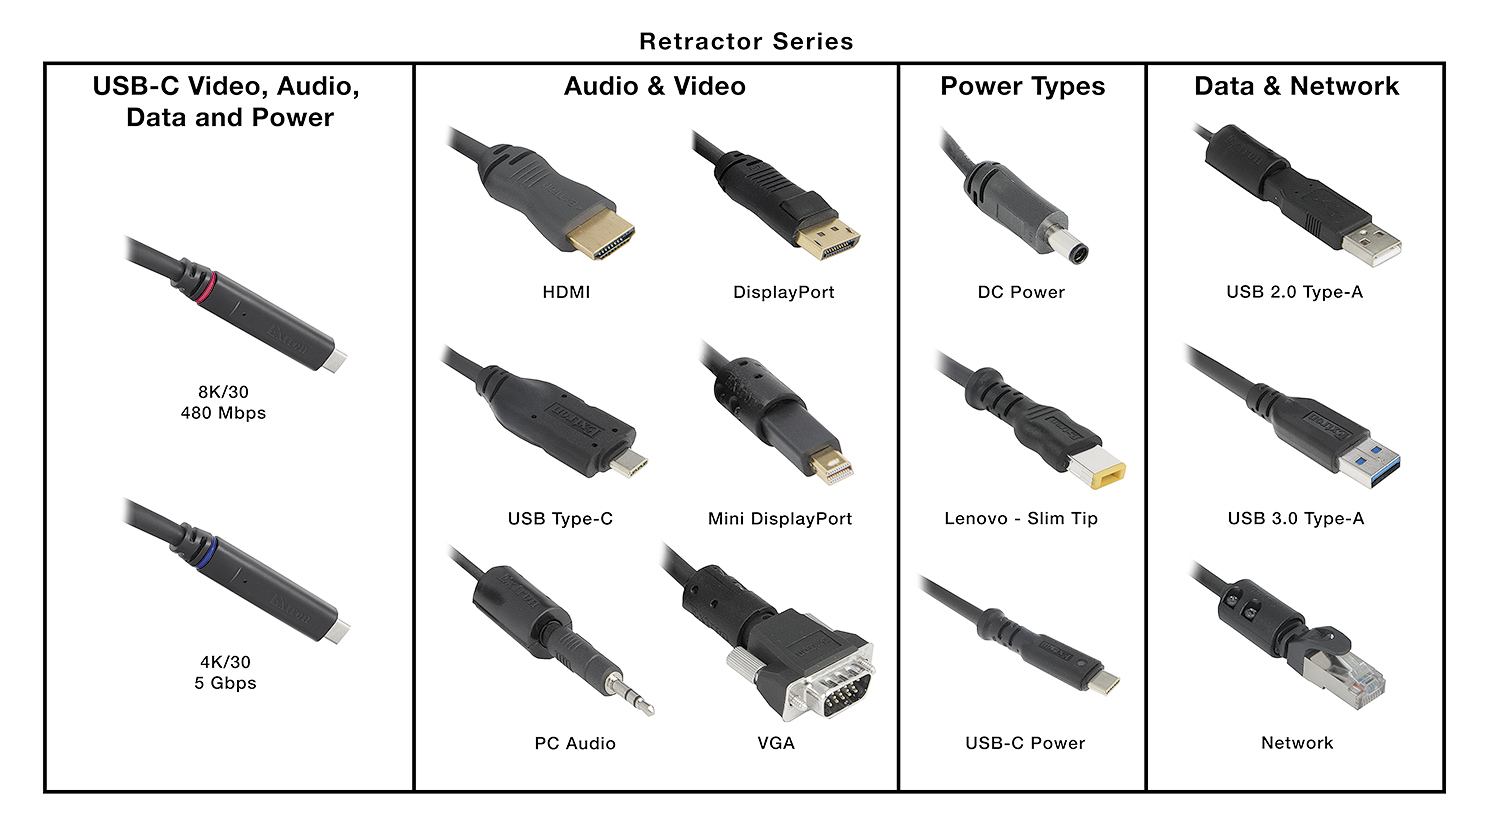 Retractor XL modules are available with a variety of commonly used connectors